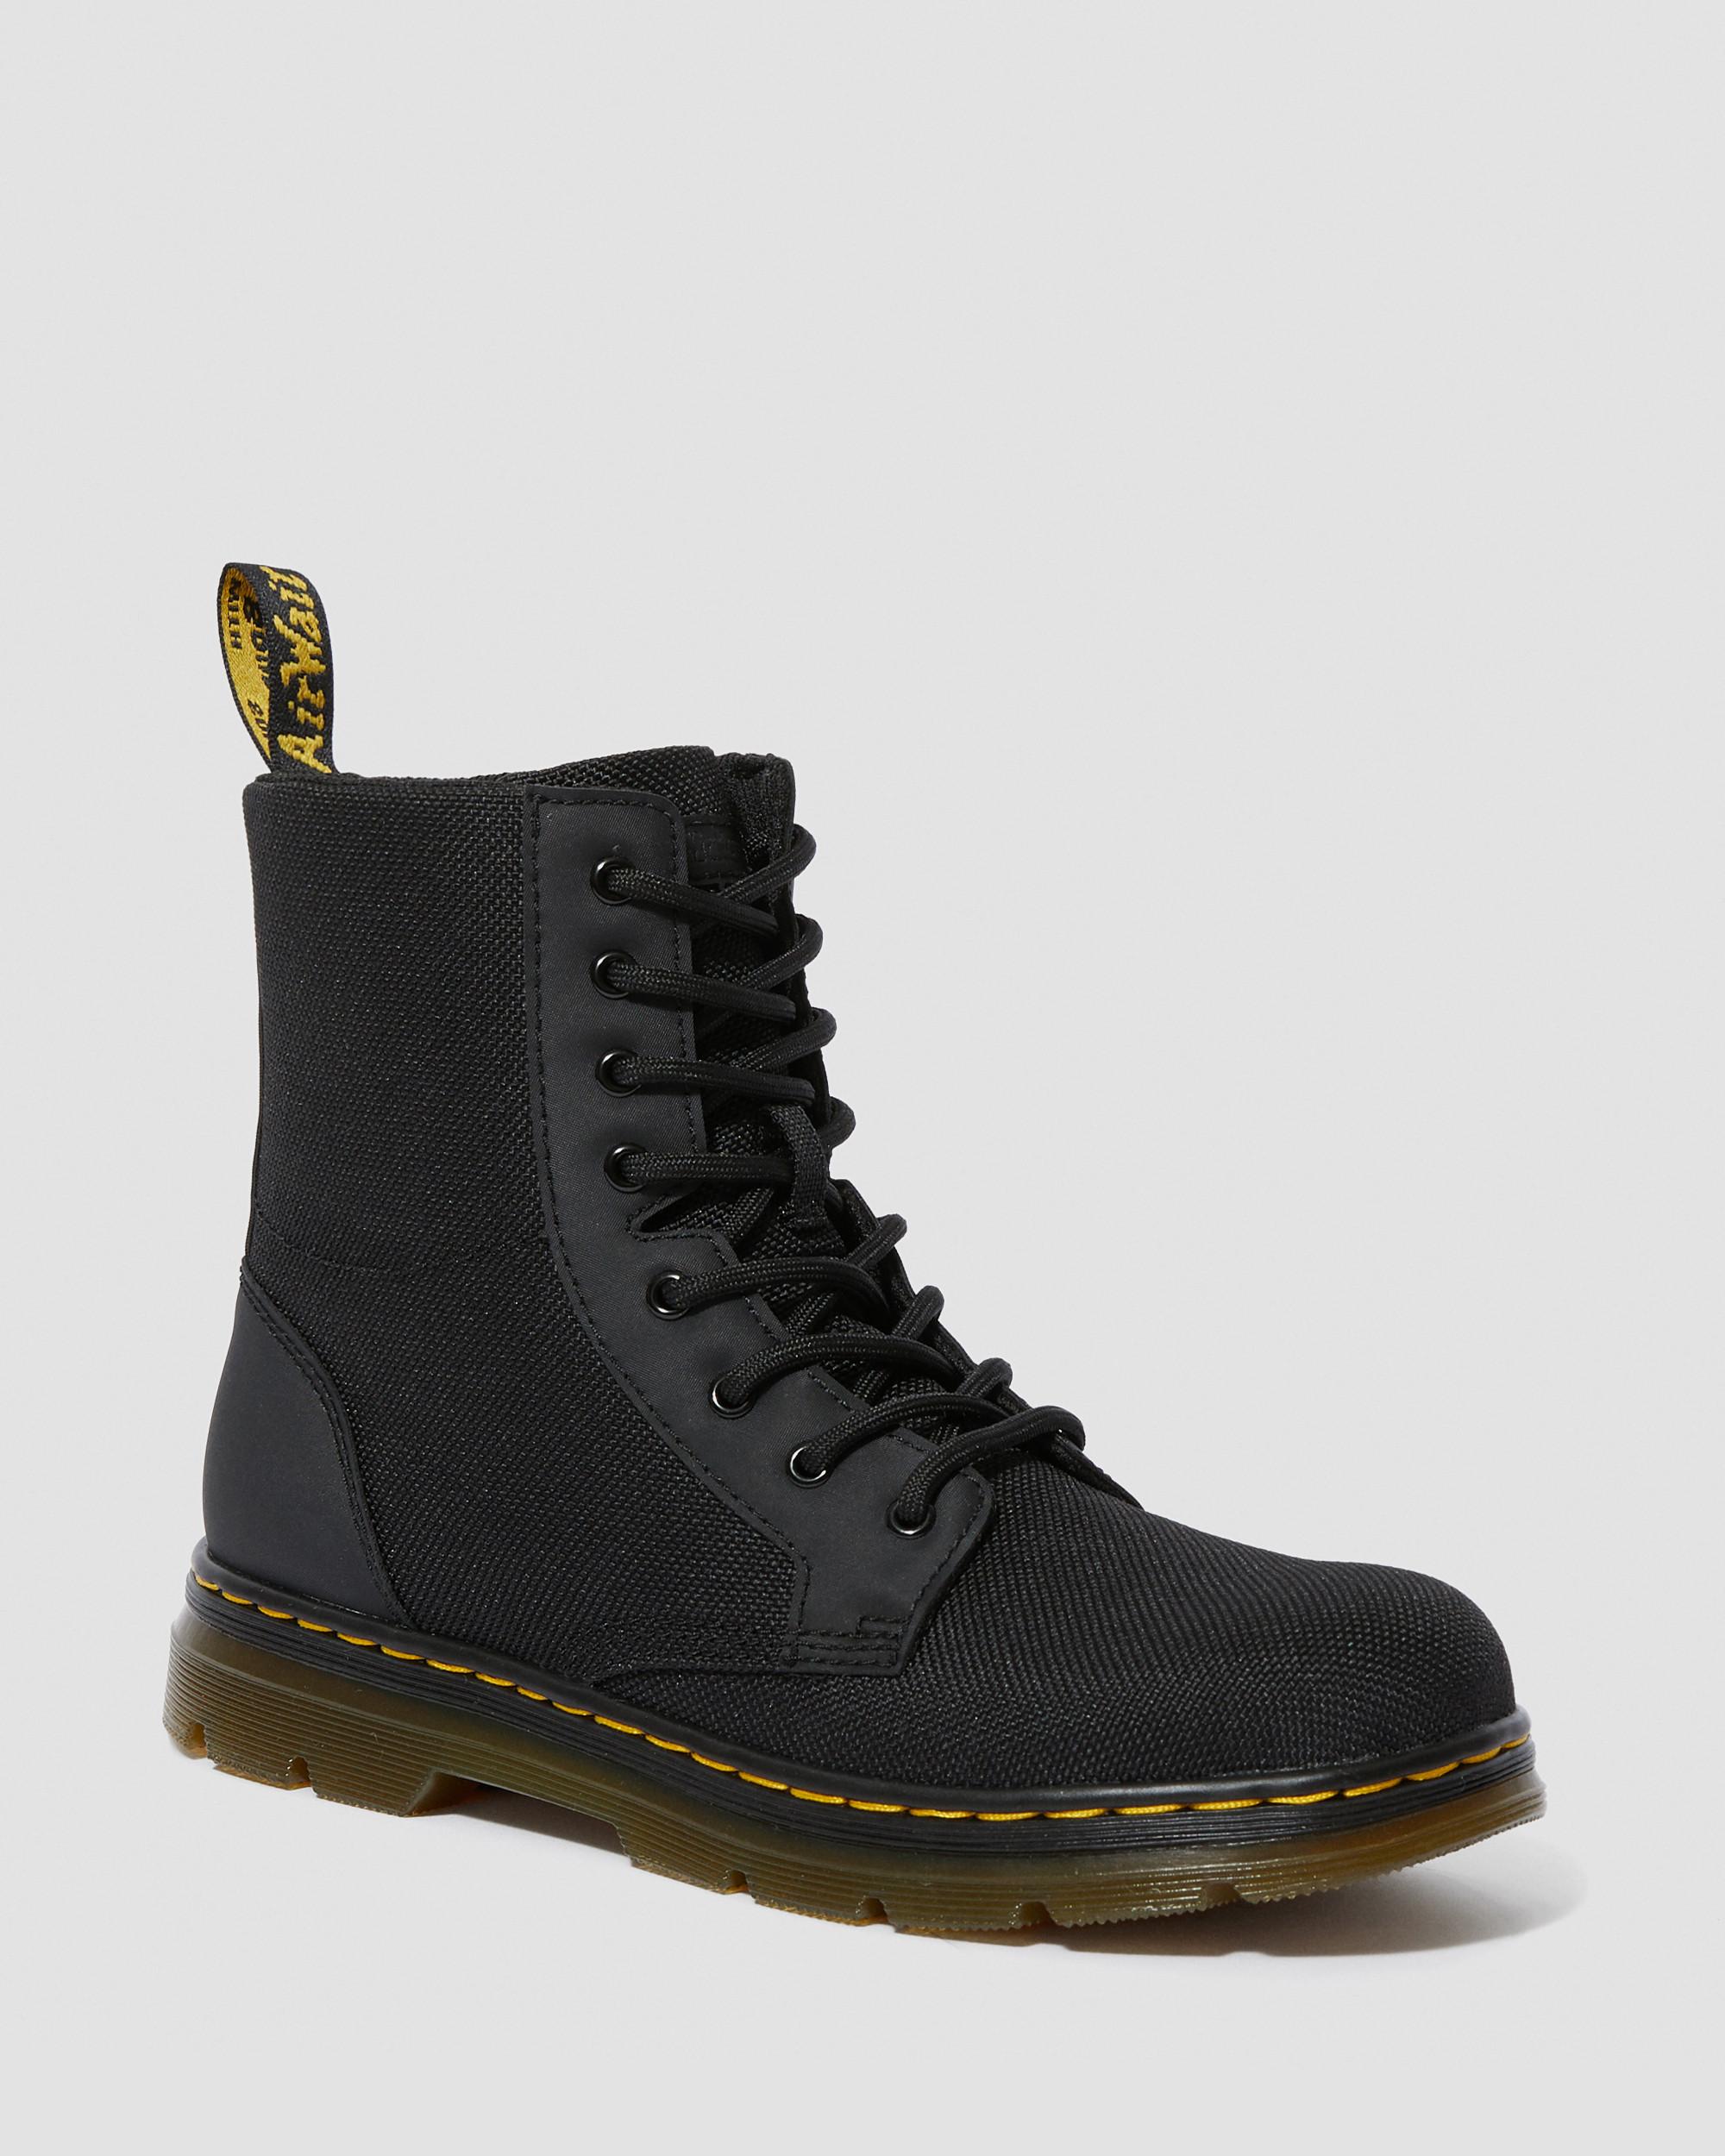 Youth 2976 Softy T Leather Chelsea Boots in Black | Dr. Martens